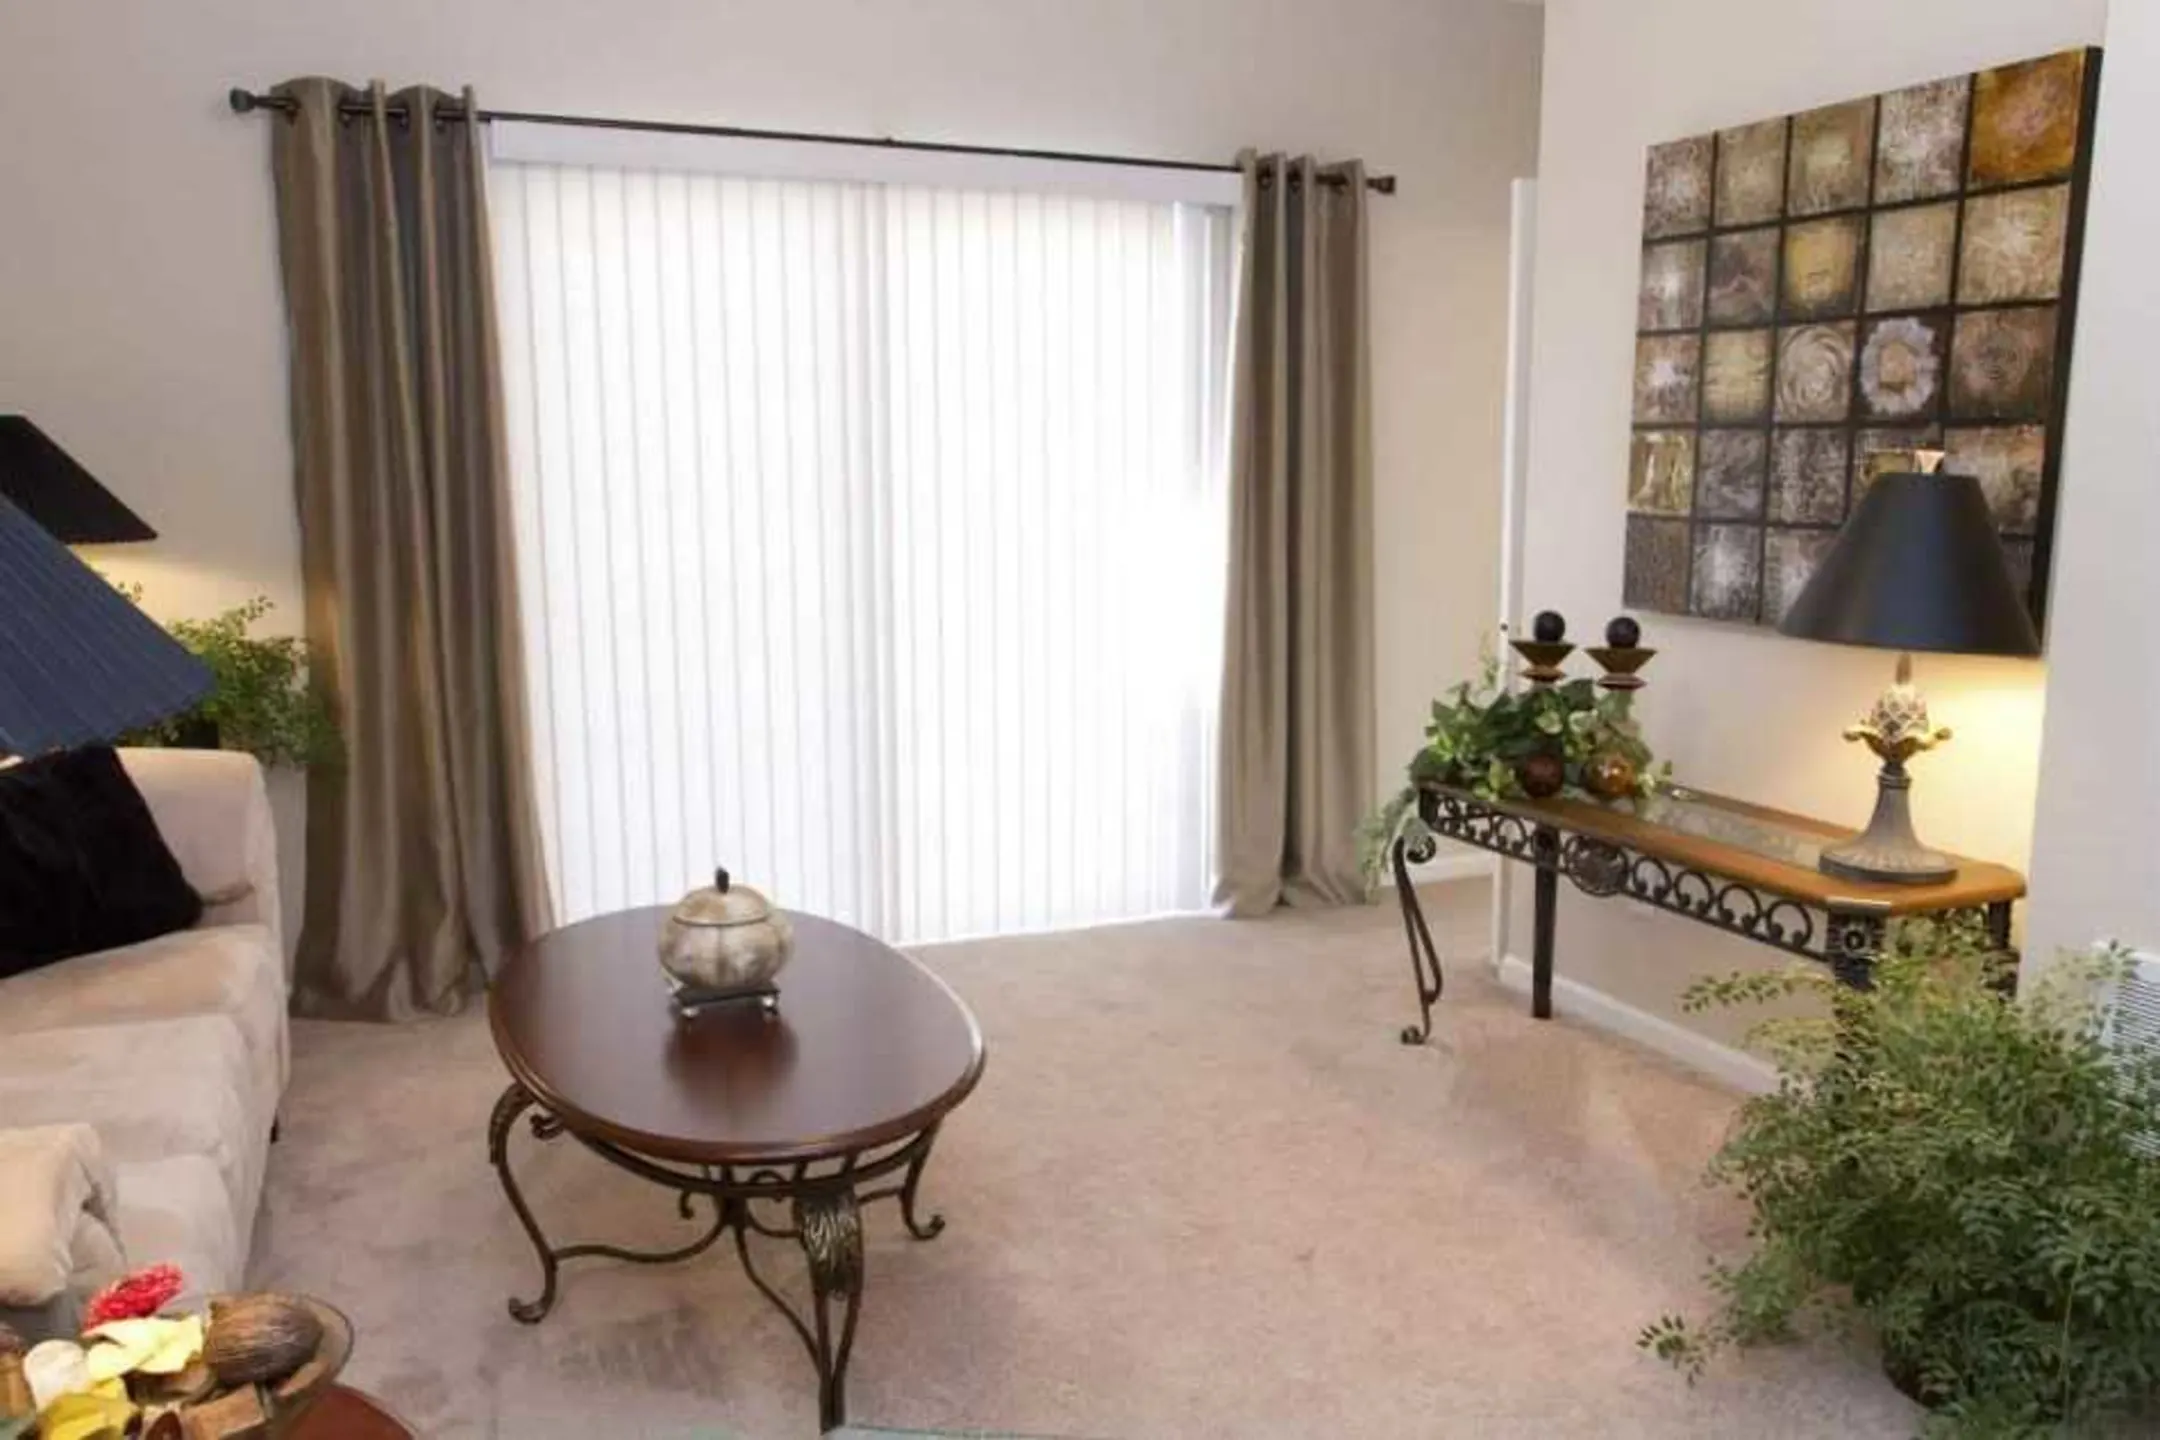 Living Room - Lighthouse Apartments At Pebble Creek - Jeffersonville, IN